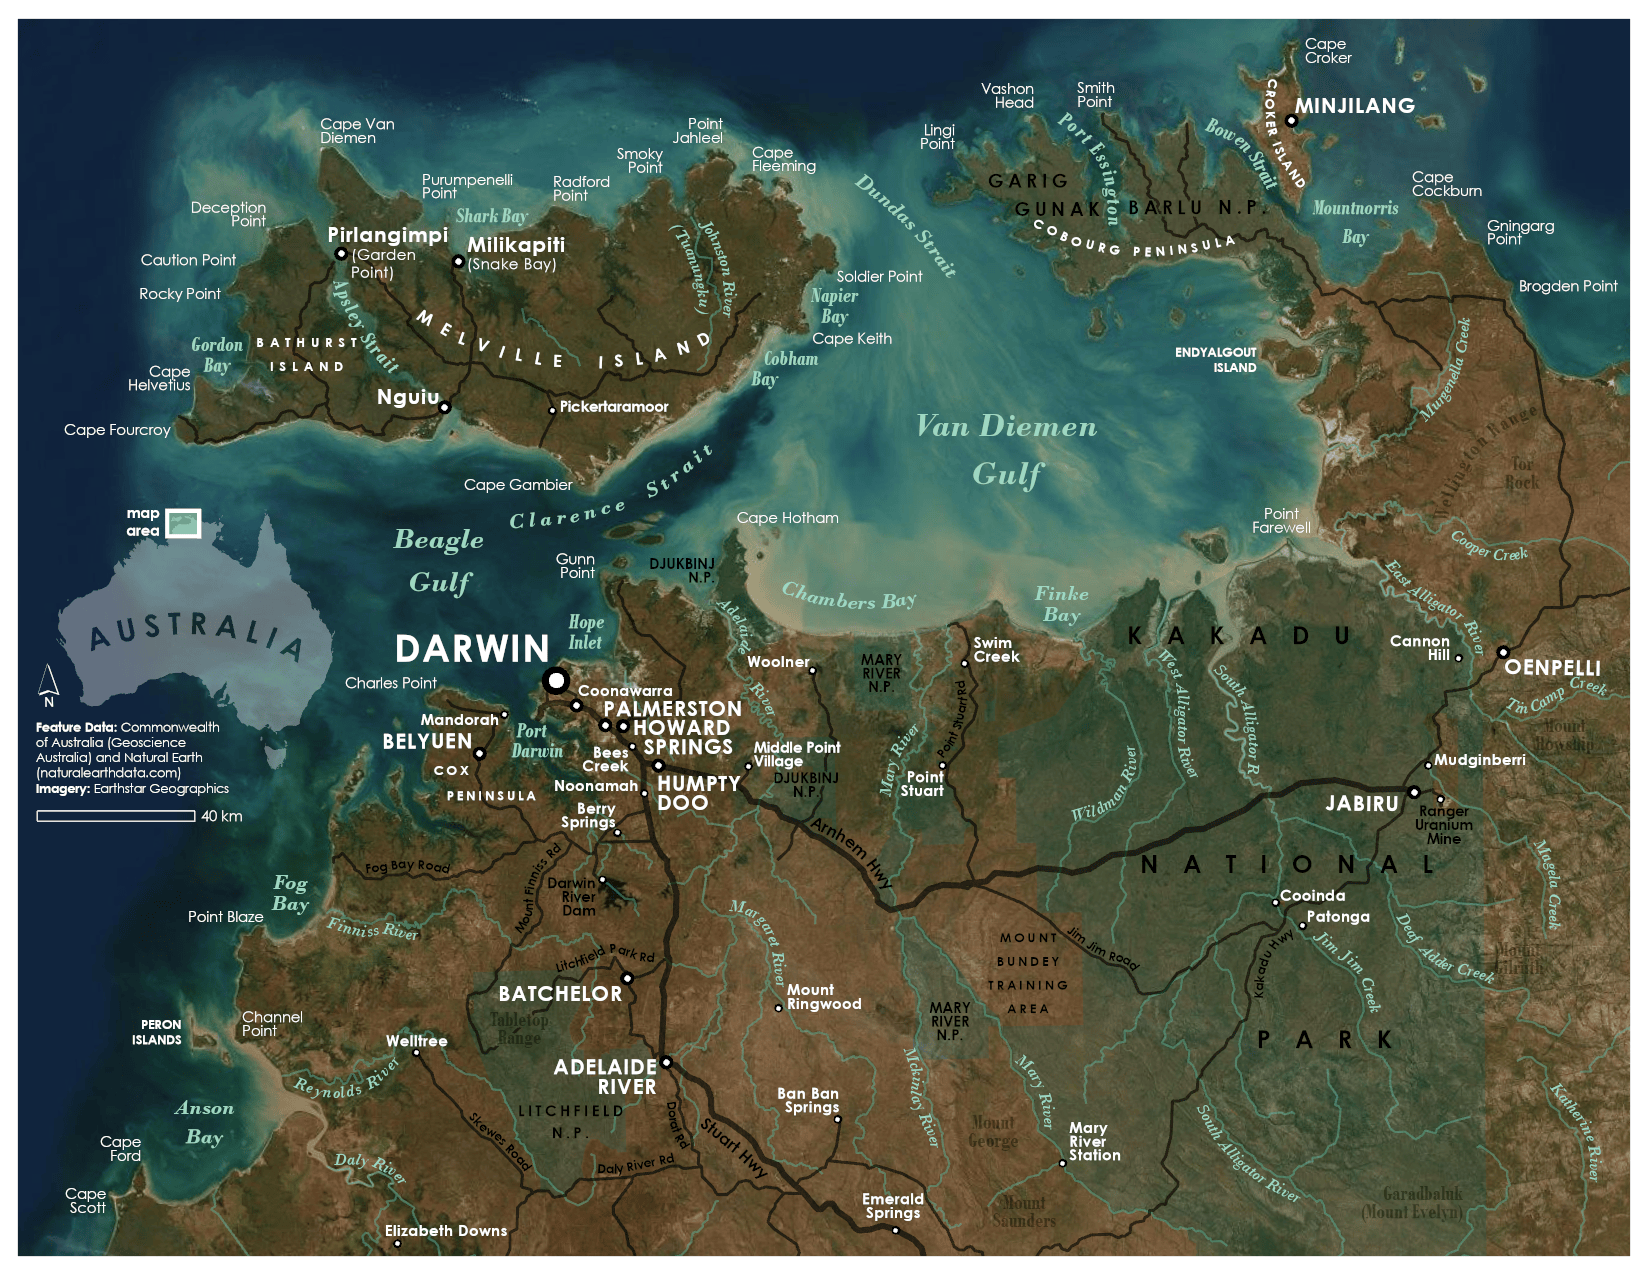 Completed map of Darwin, Australia